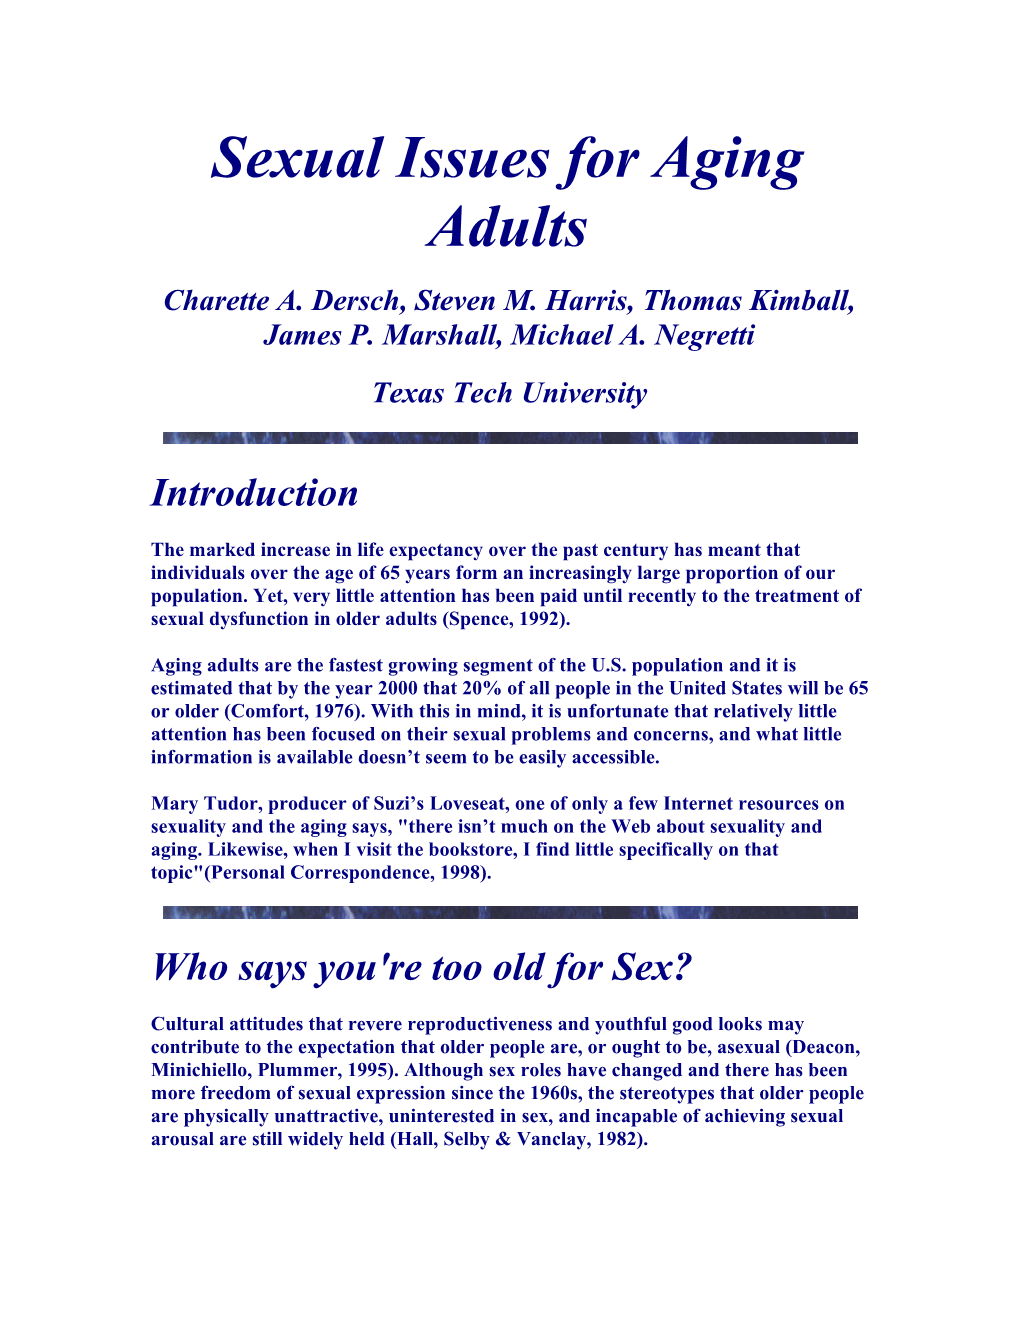 Sexual Issues for Aging Adults